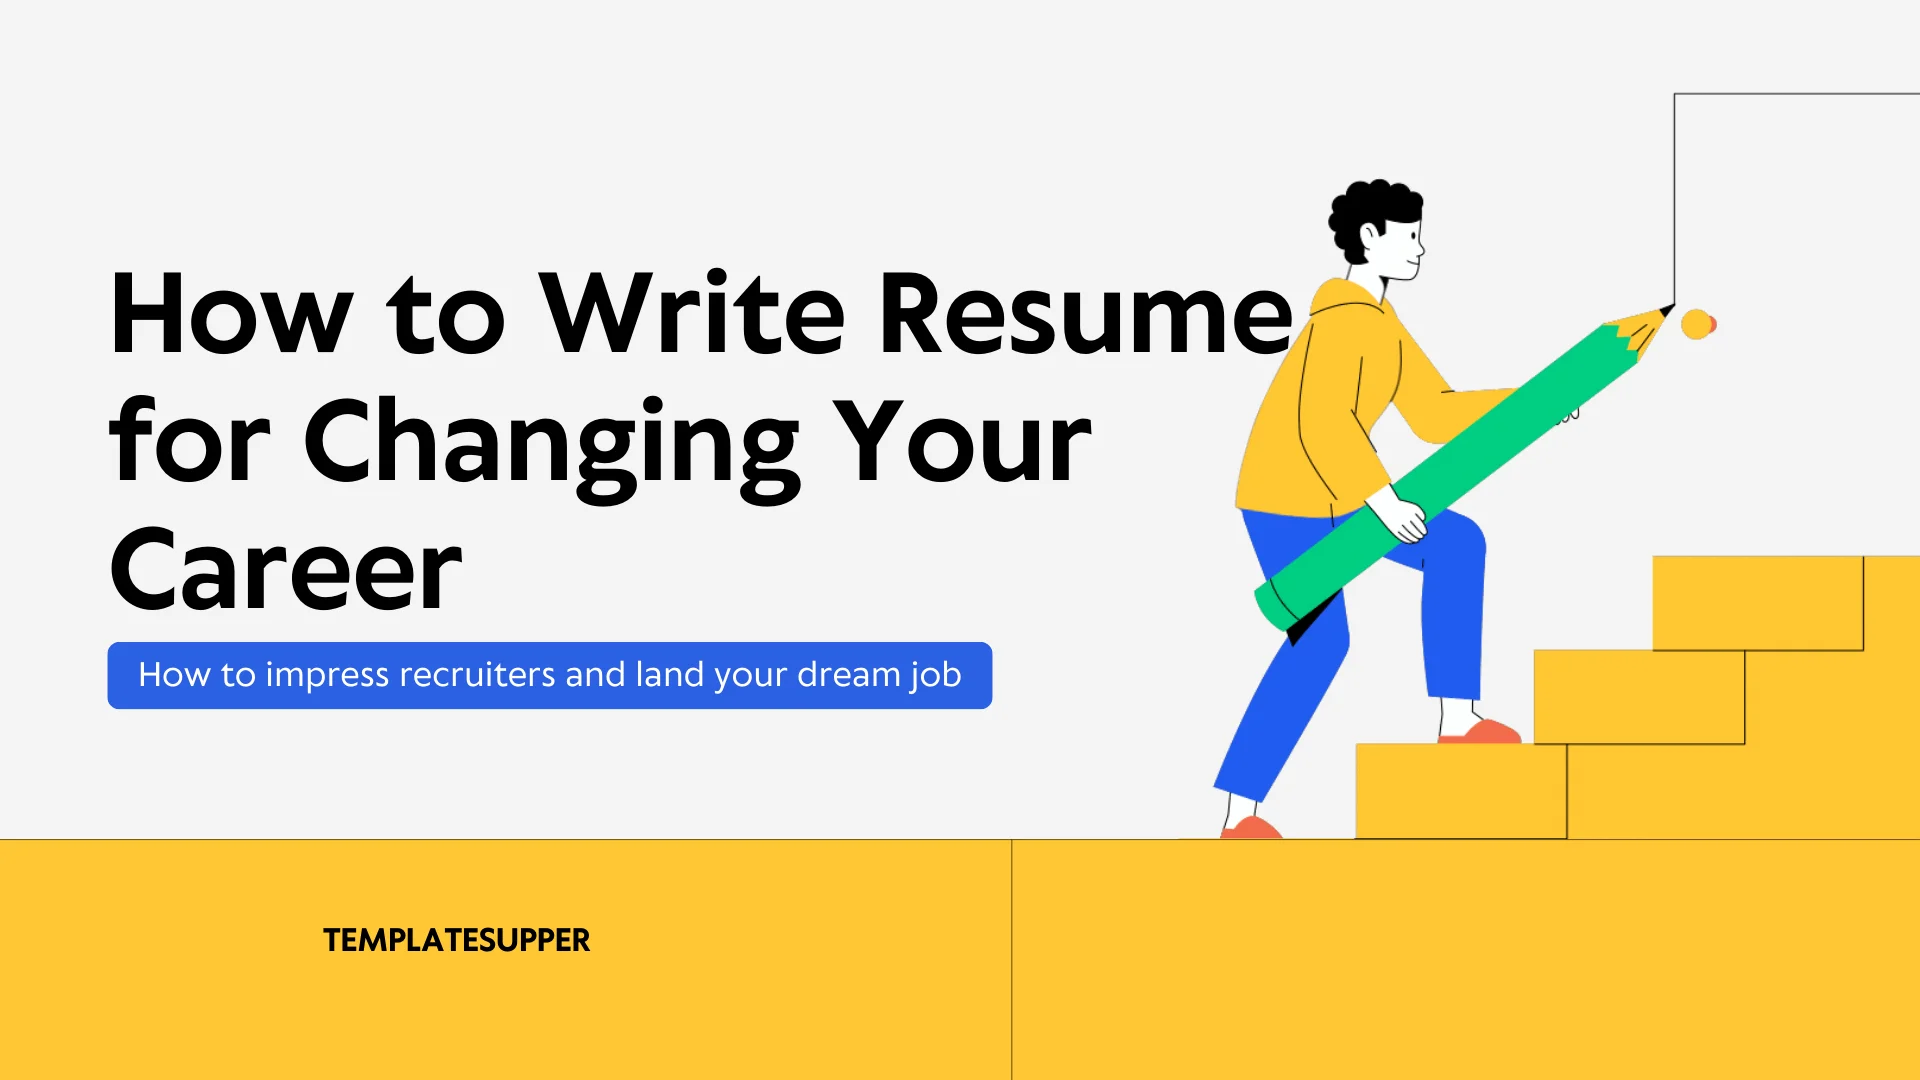 How to Write Resume for Changing Your Career